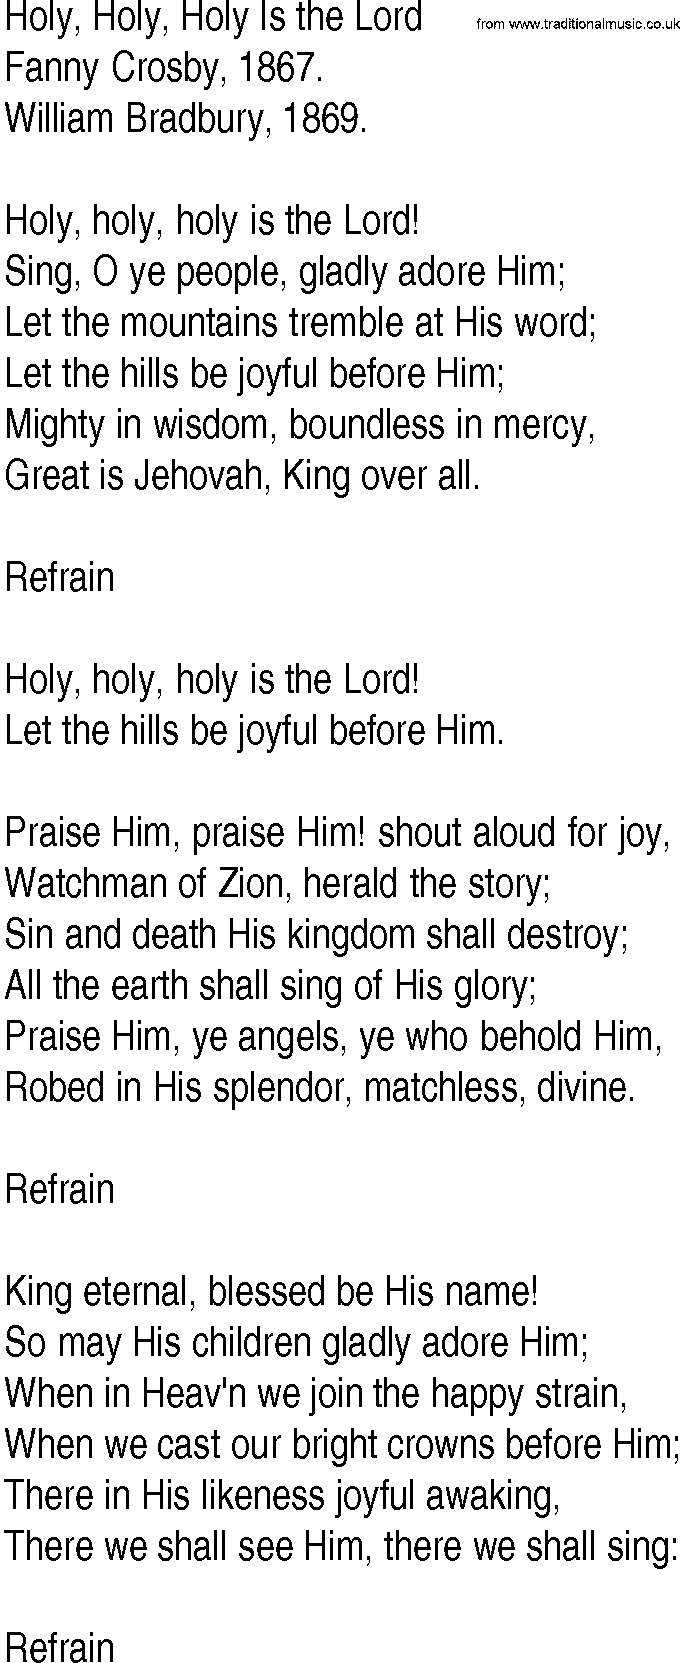 Hymn and Gospel Song: Holy, Holy, Holy Is the Lord by Fanny Crosby lyrics